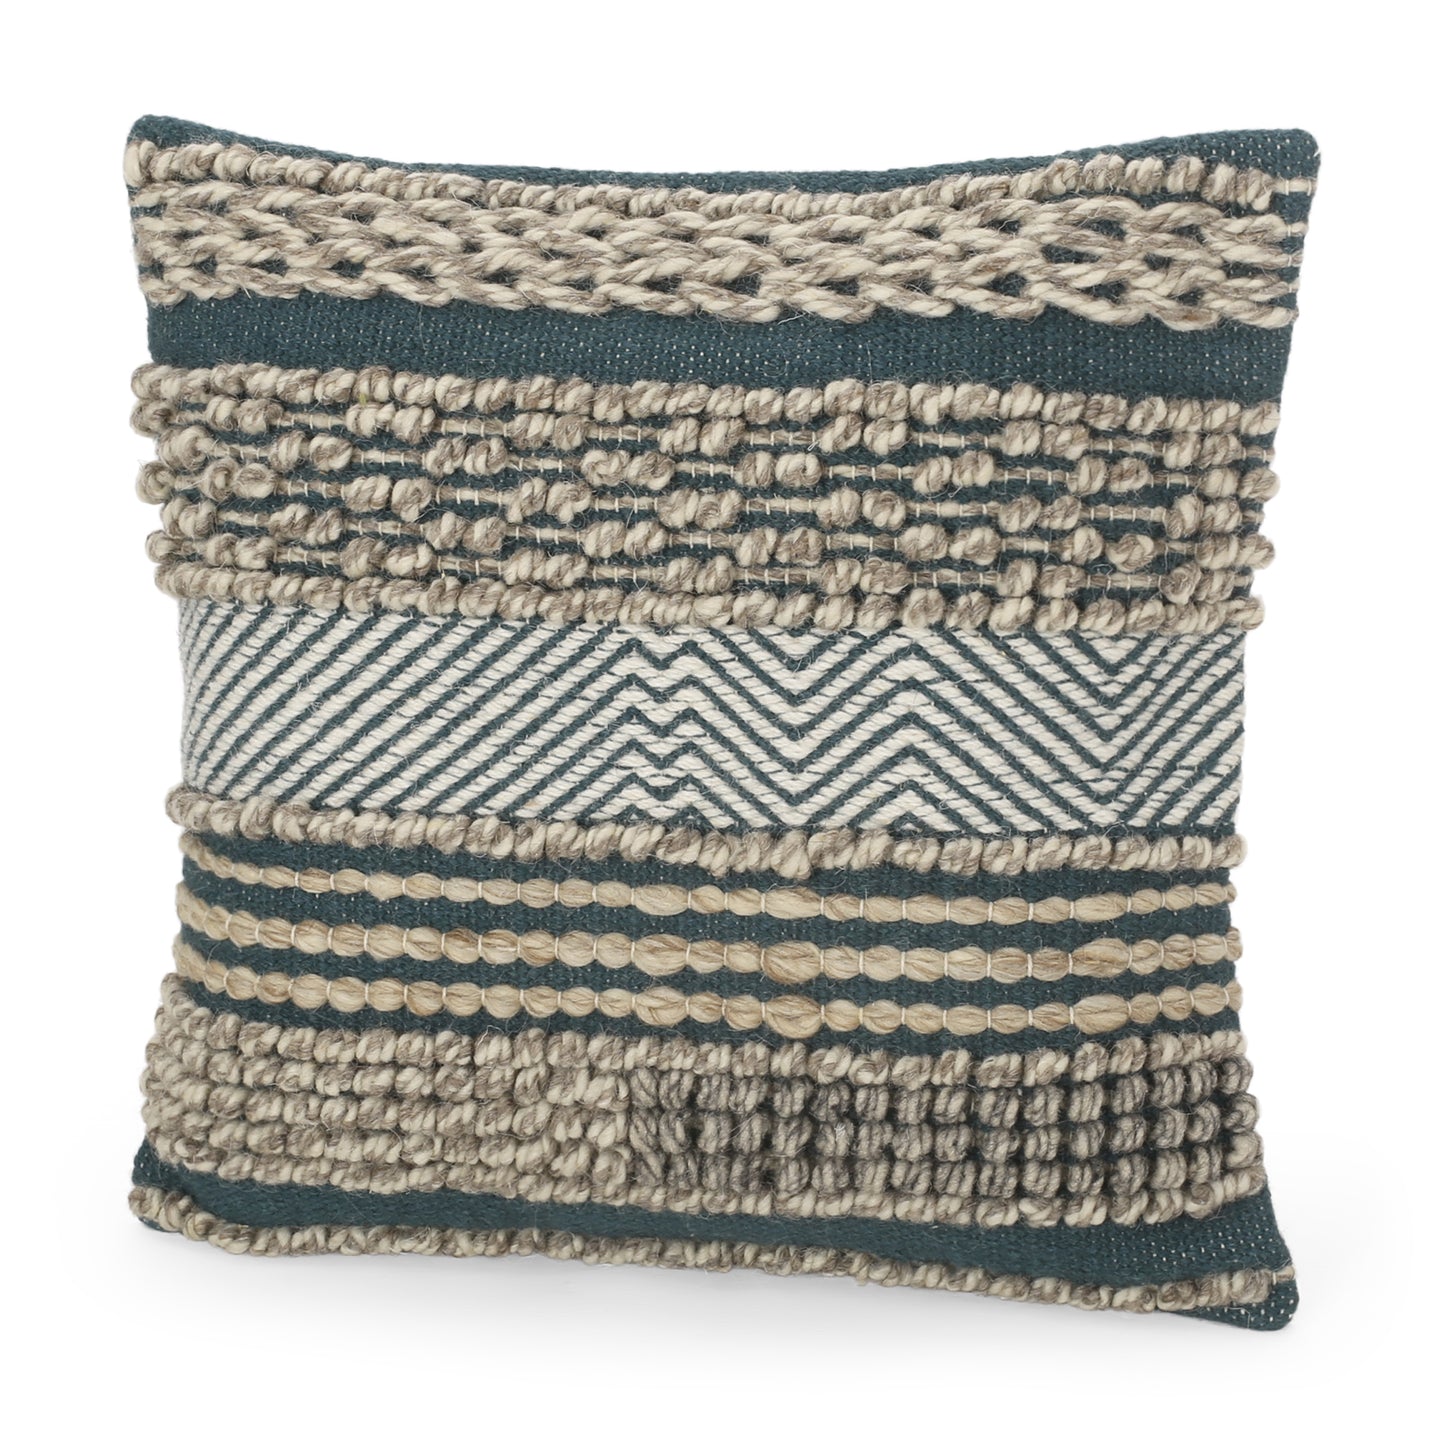 Symere Hand-Loomed Boho Throw Pillow